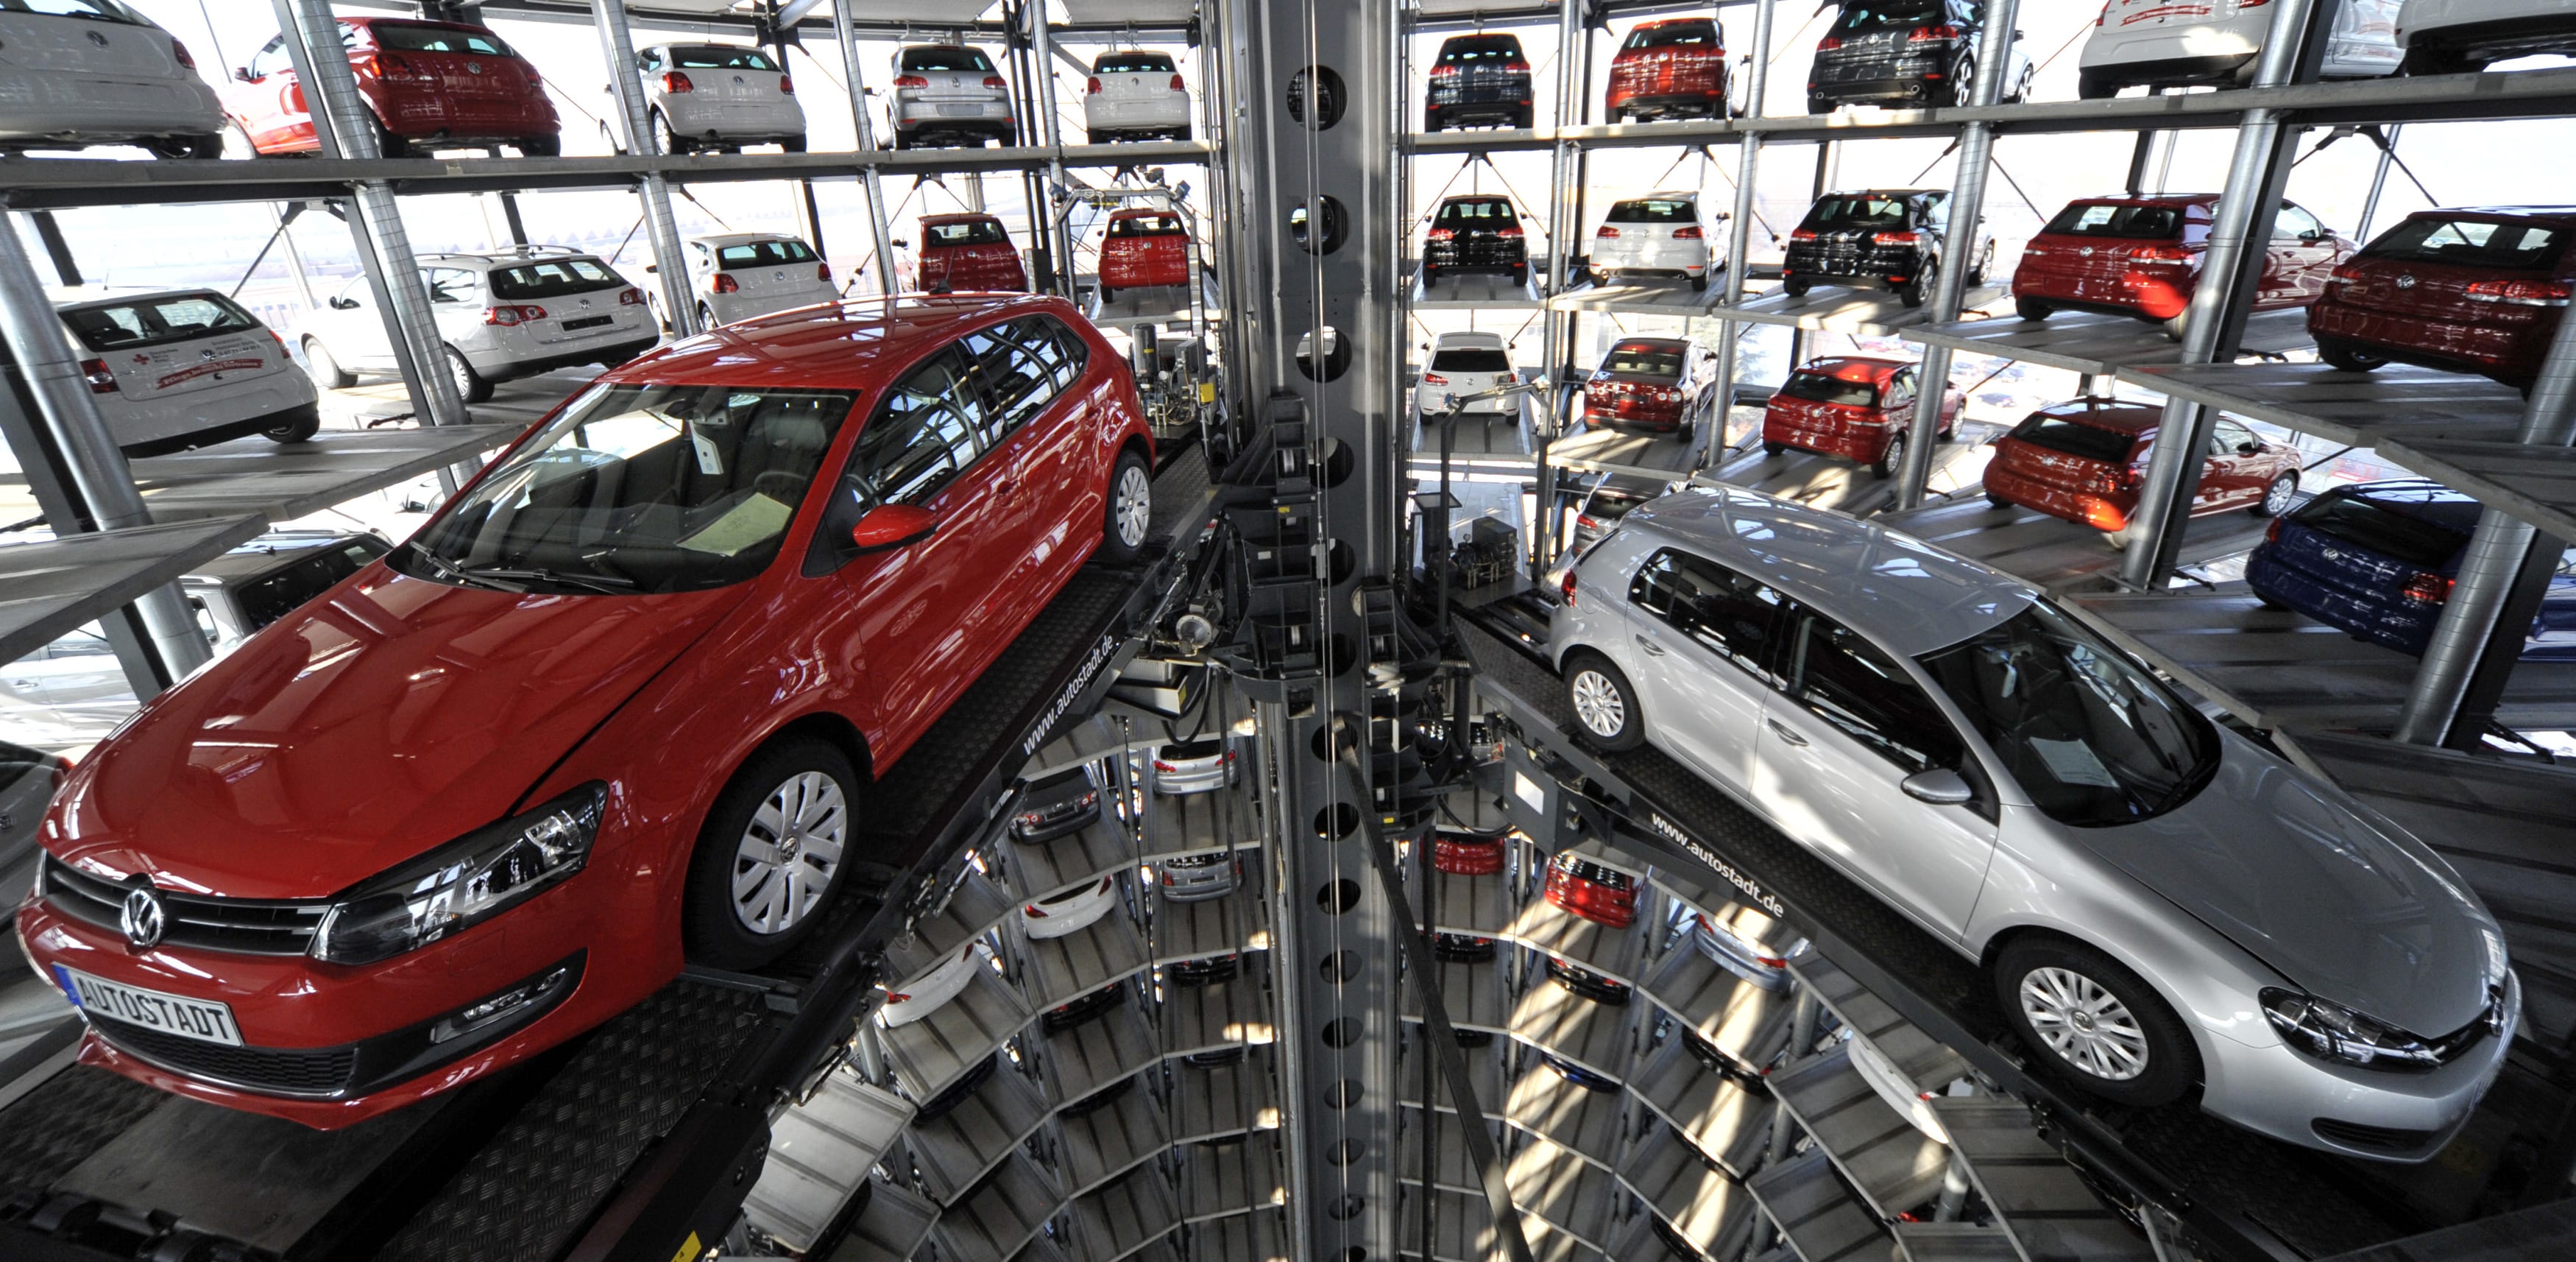 Germany's car industry faces big challenges after coronavirus